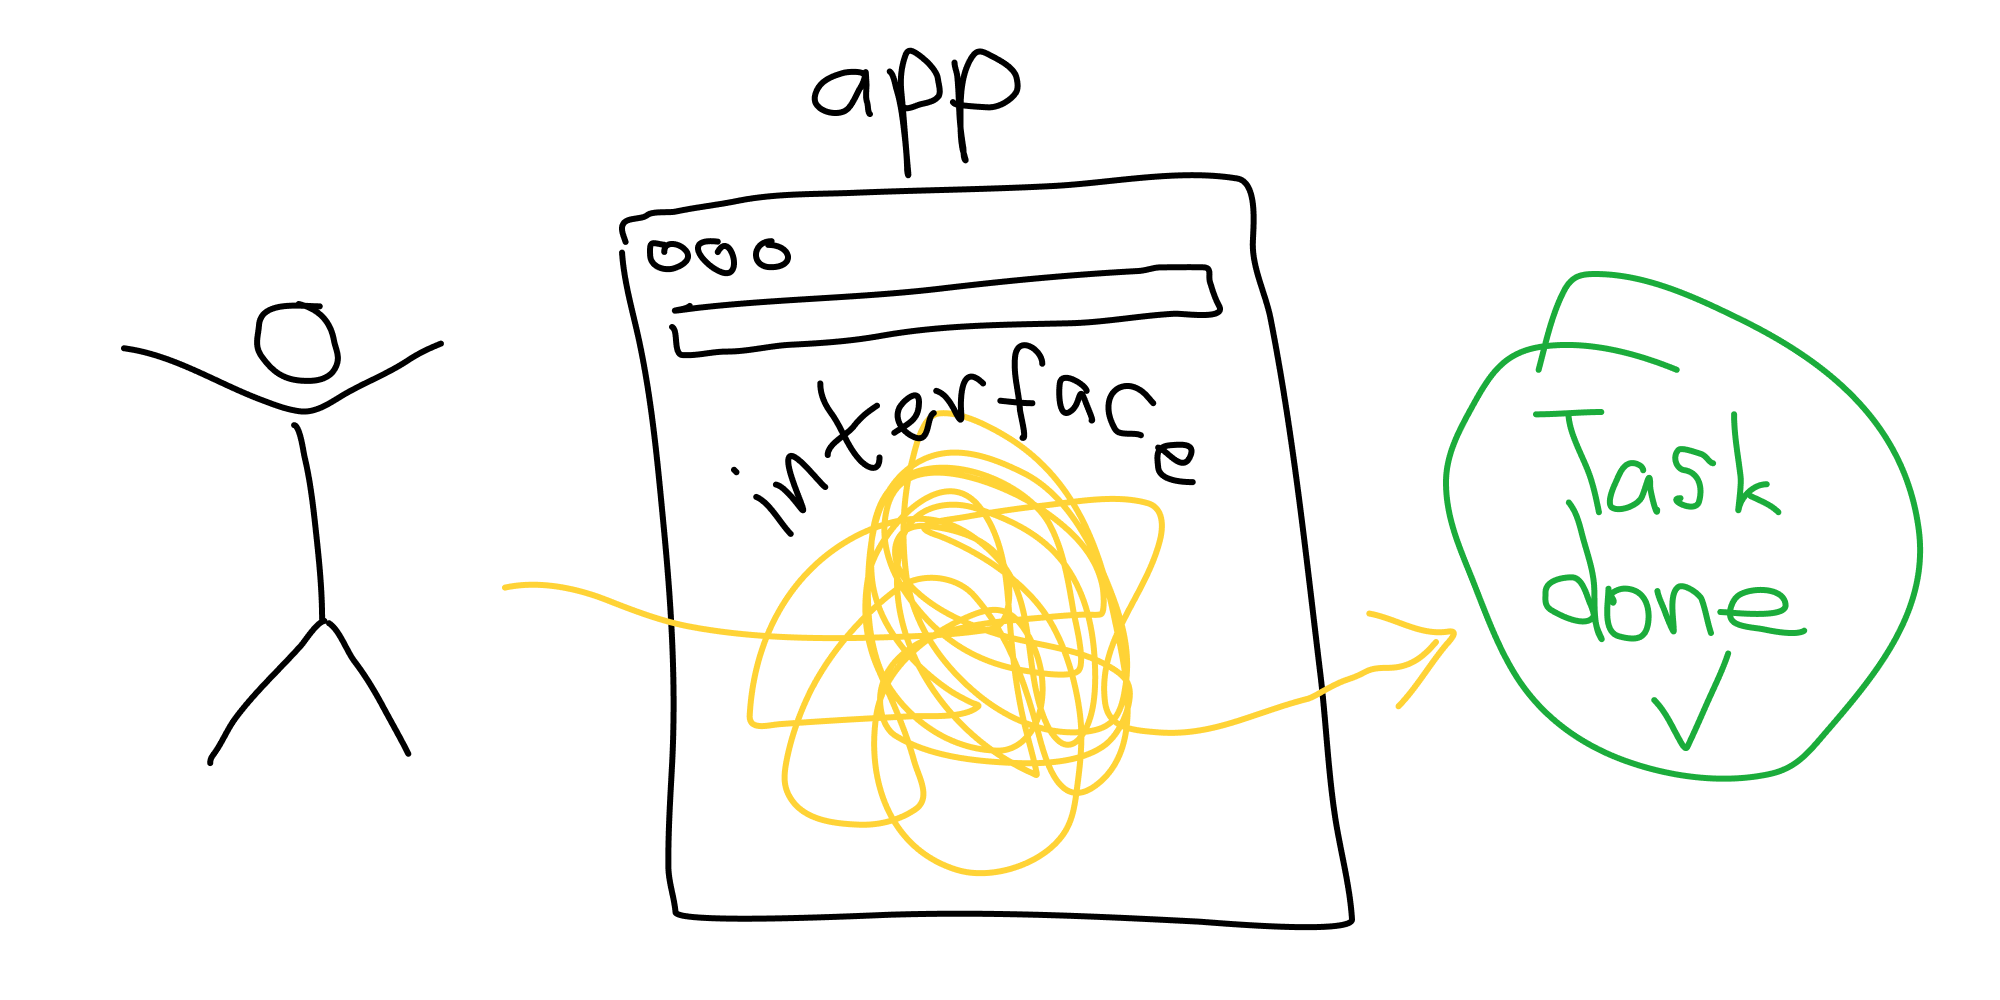 User interacts with UI of an app